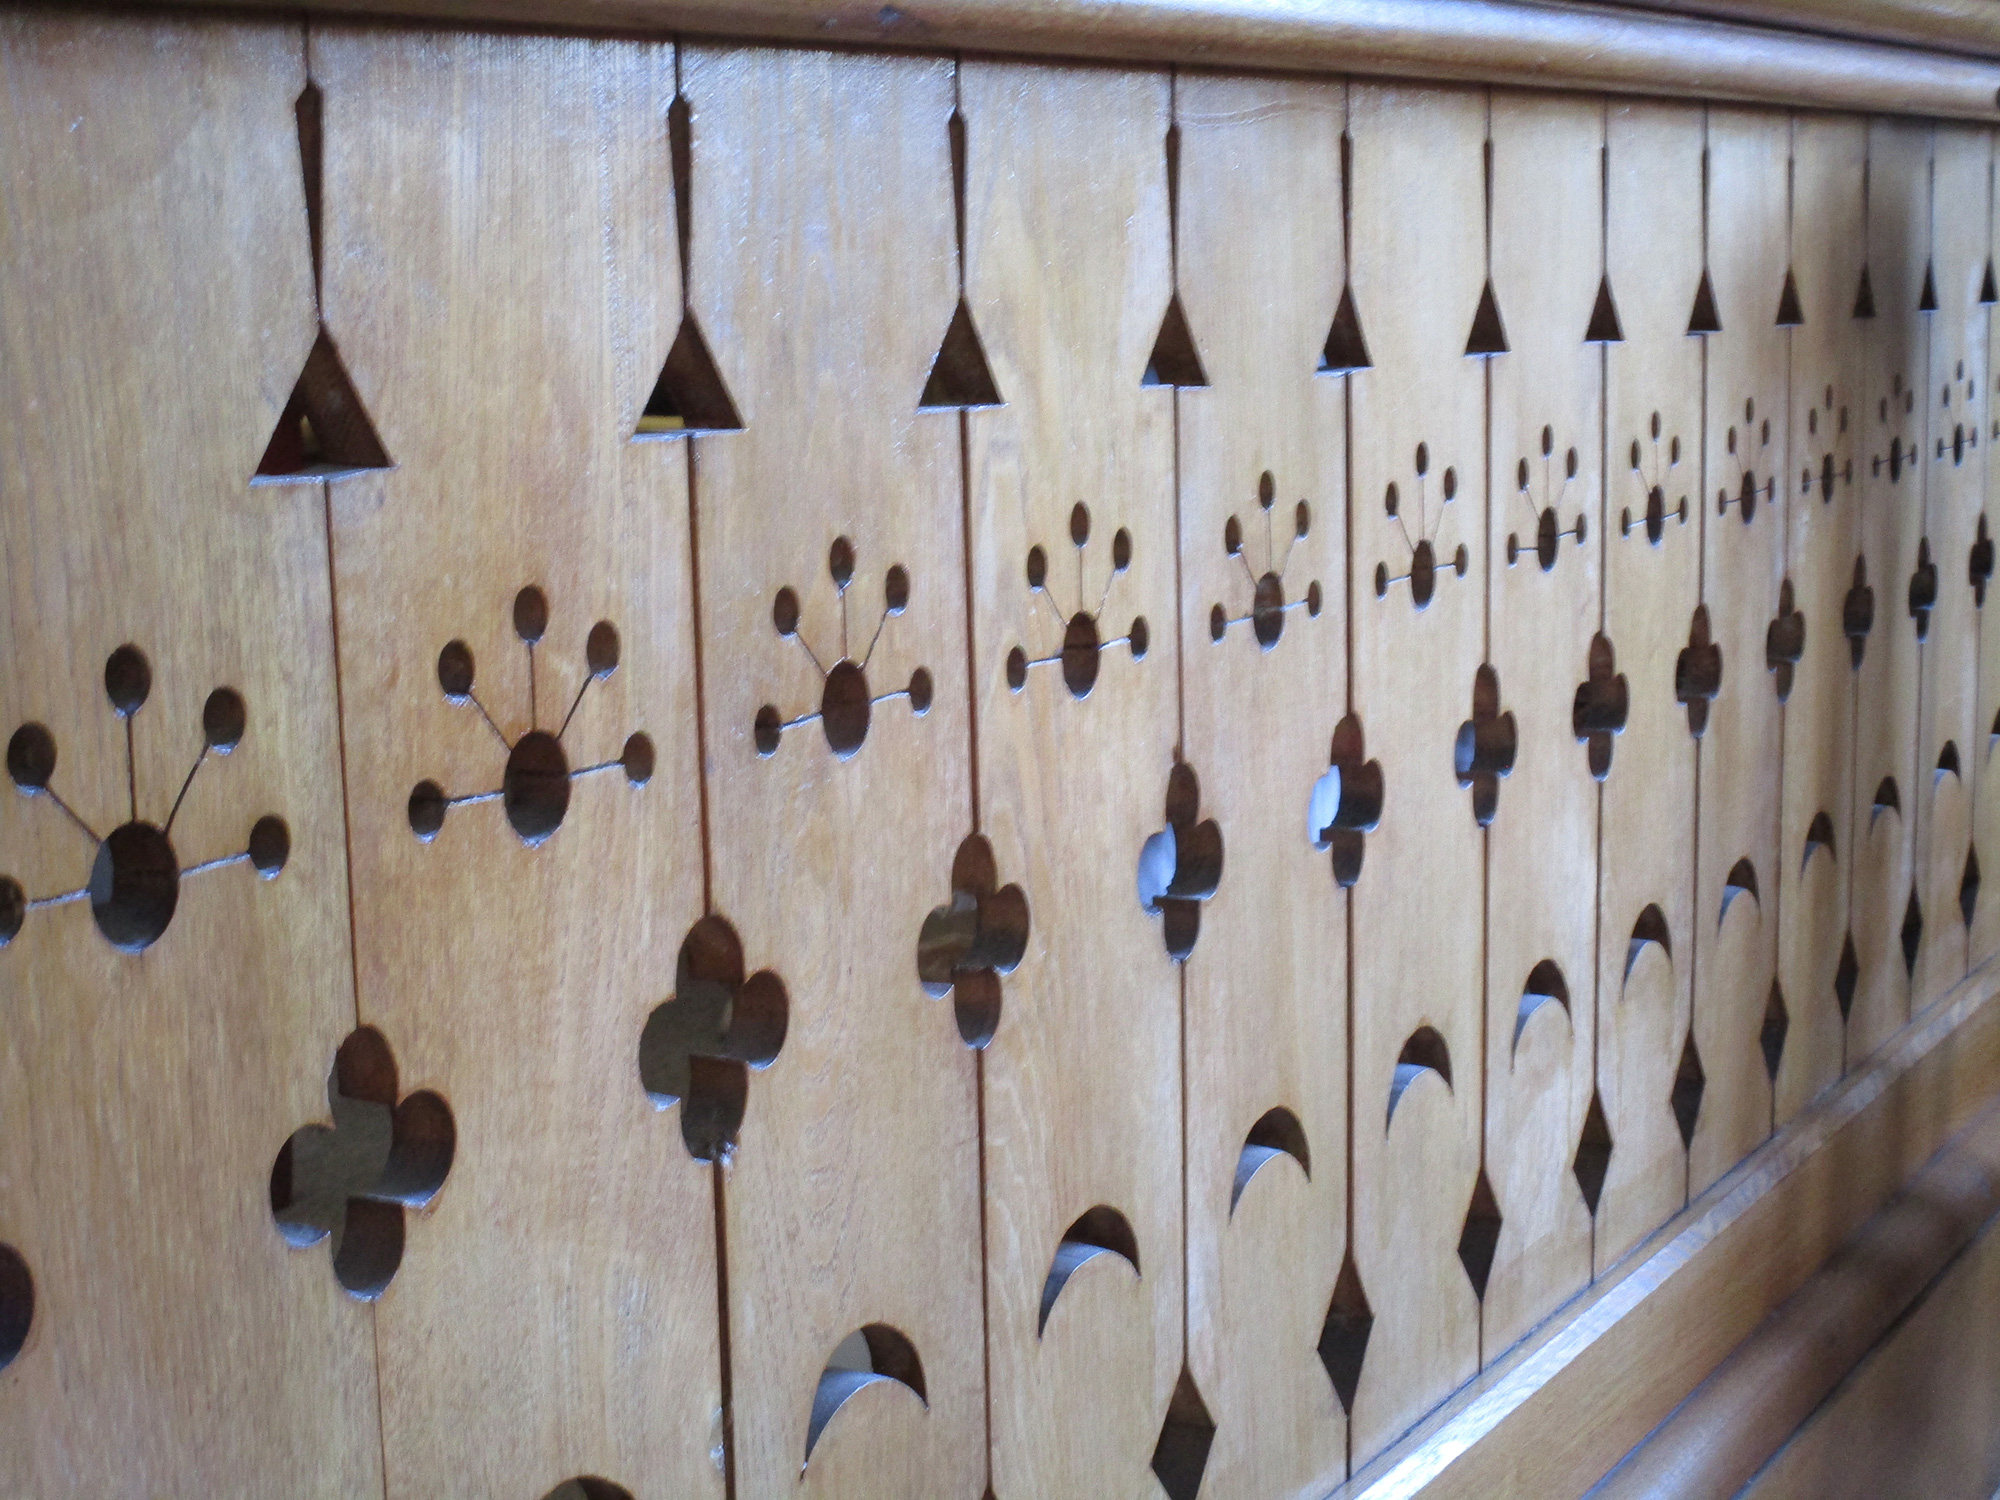 Woodwork in the church